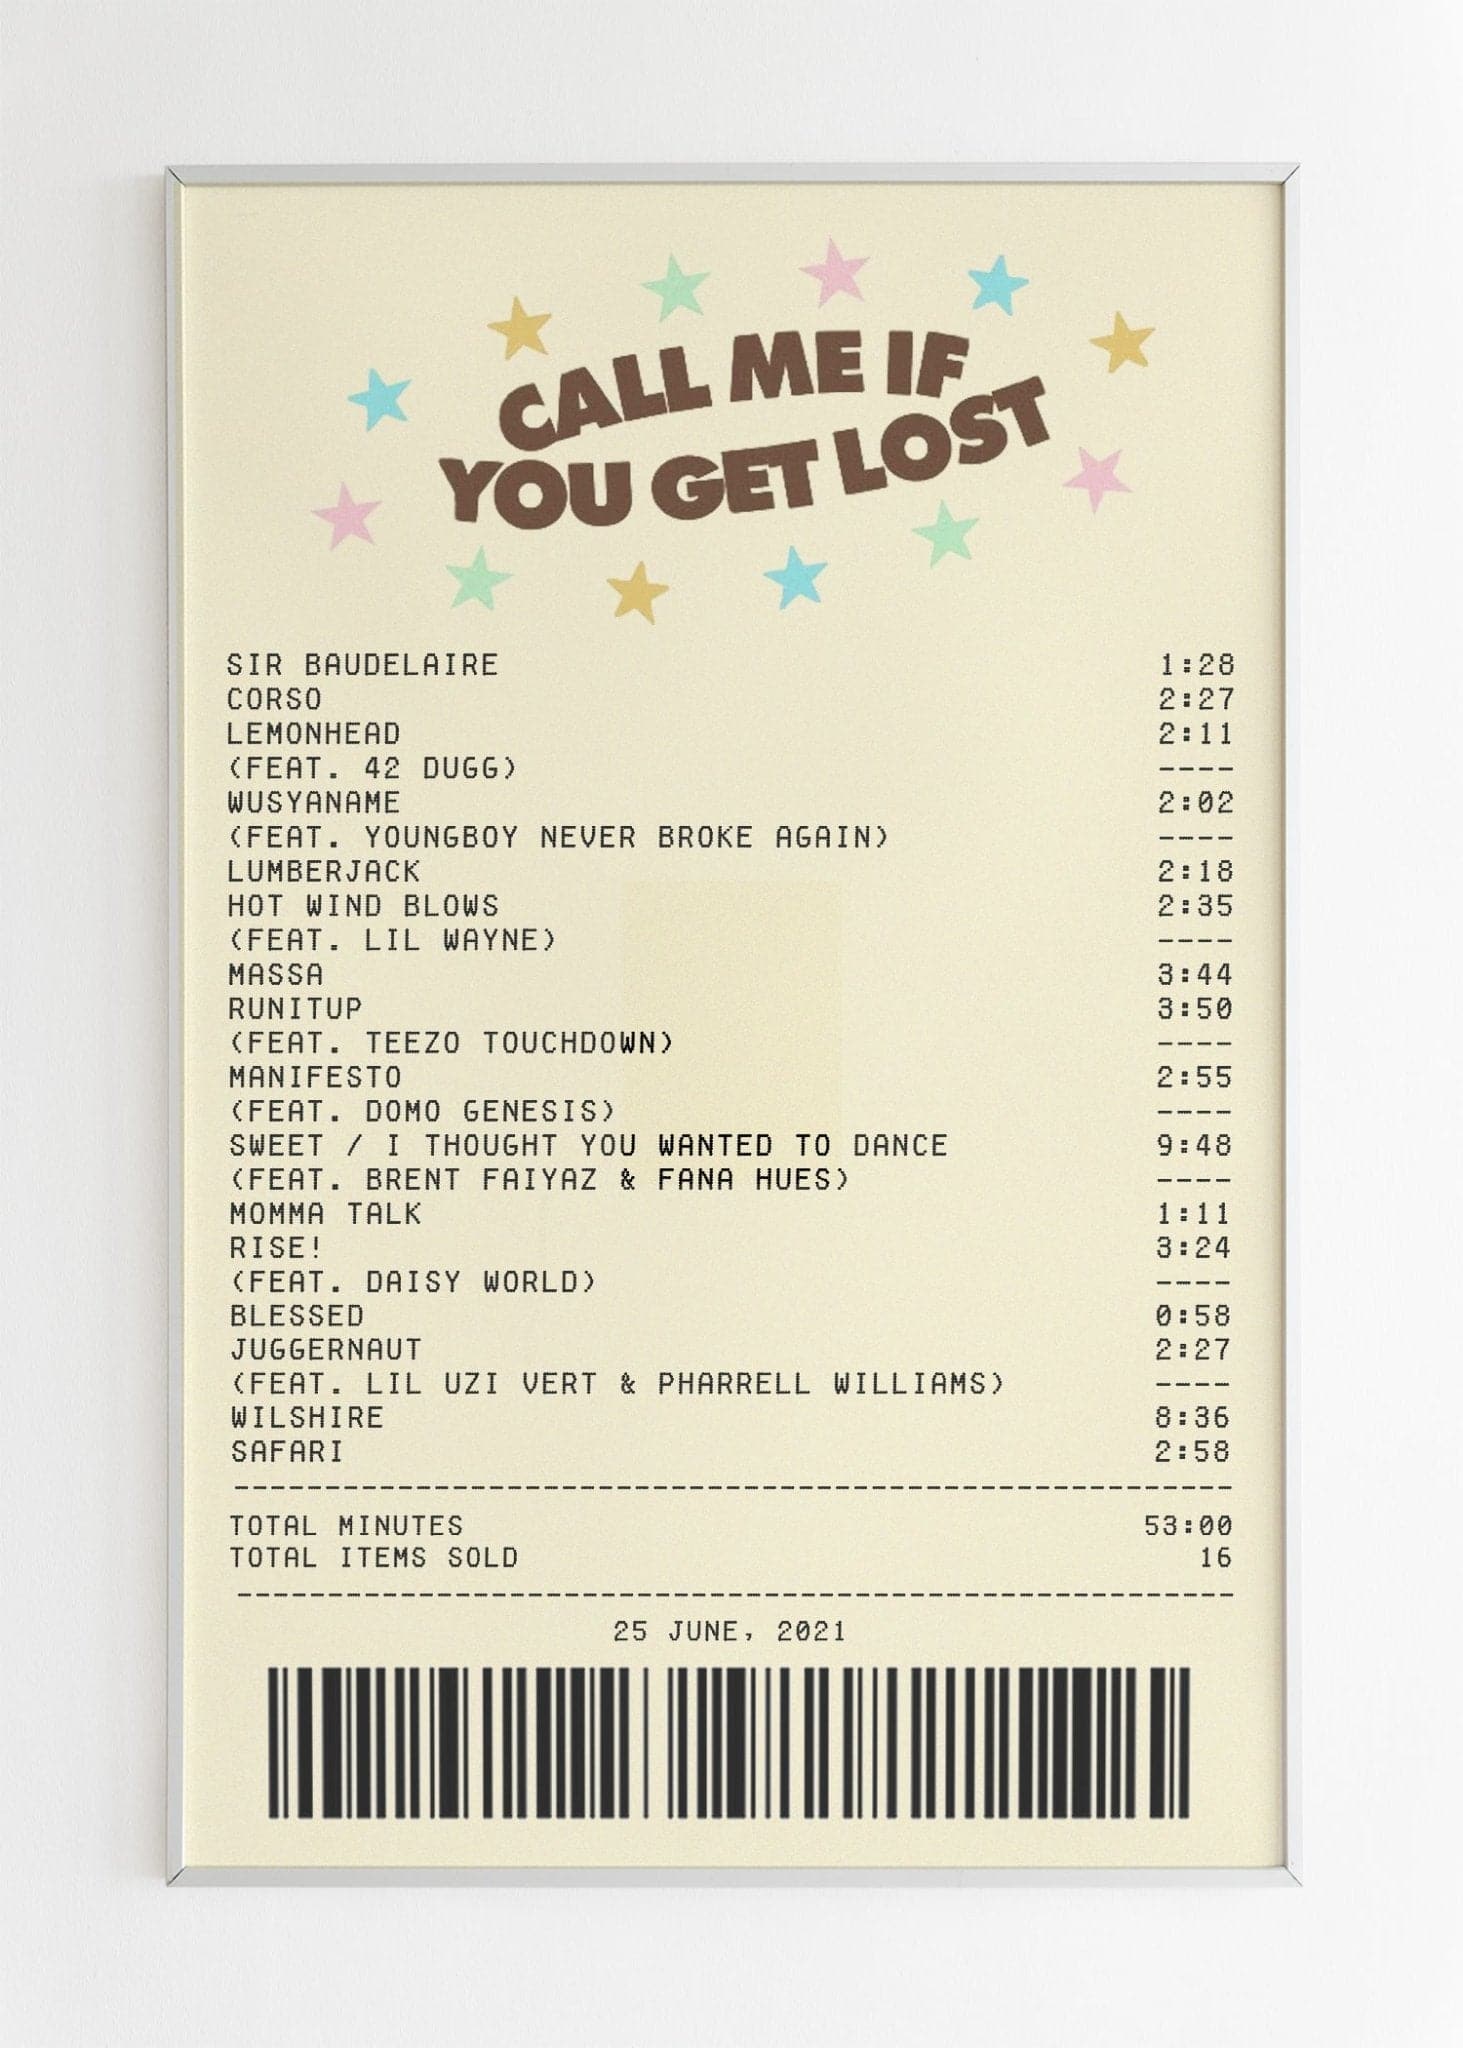 Call Me If You Get Lost Receipt Poster.